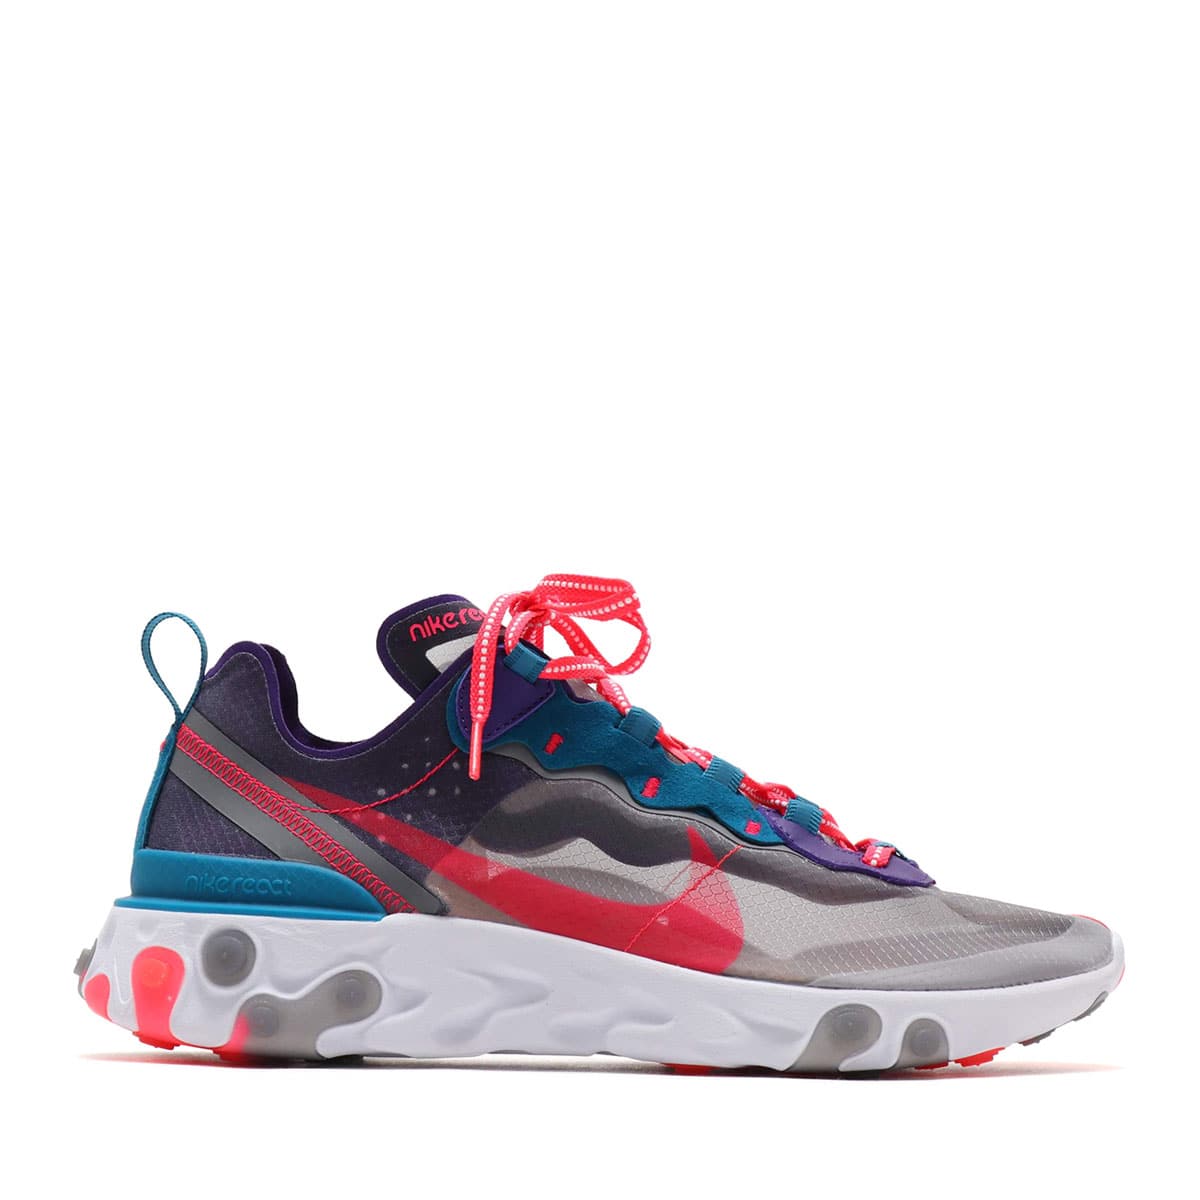 nike react element 87 donna